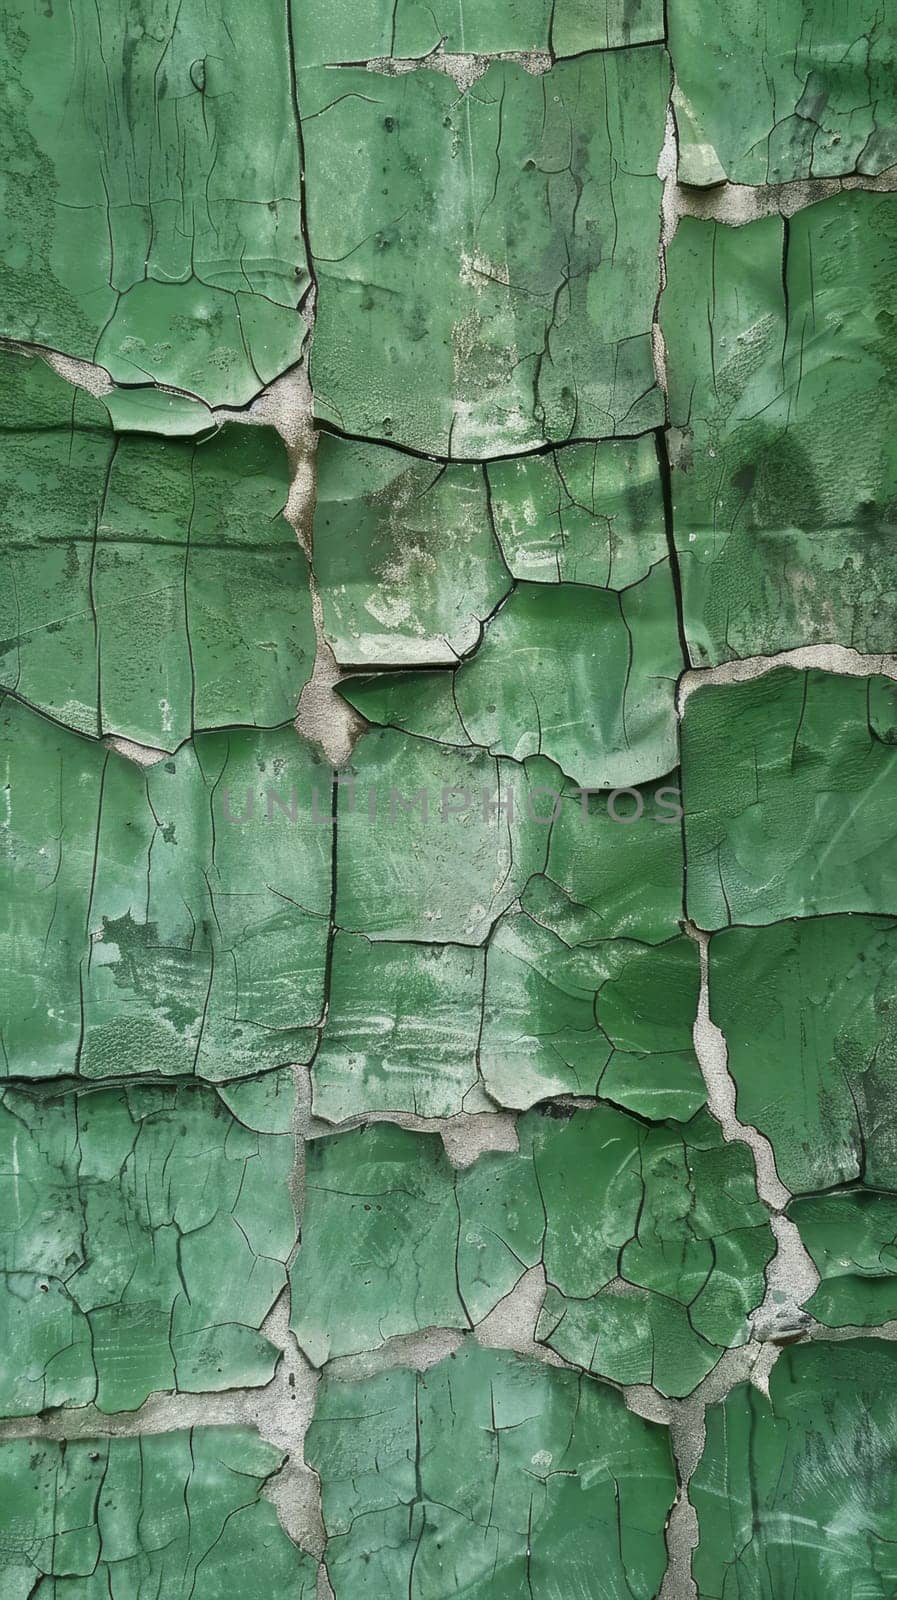 This image showcases a fragmented green paint texture, where the vividness of the color contrasts with the brittleness of the peeling surface. The fragmentation suggests story of decline and rebirth. by sfinks